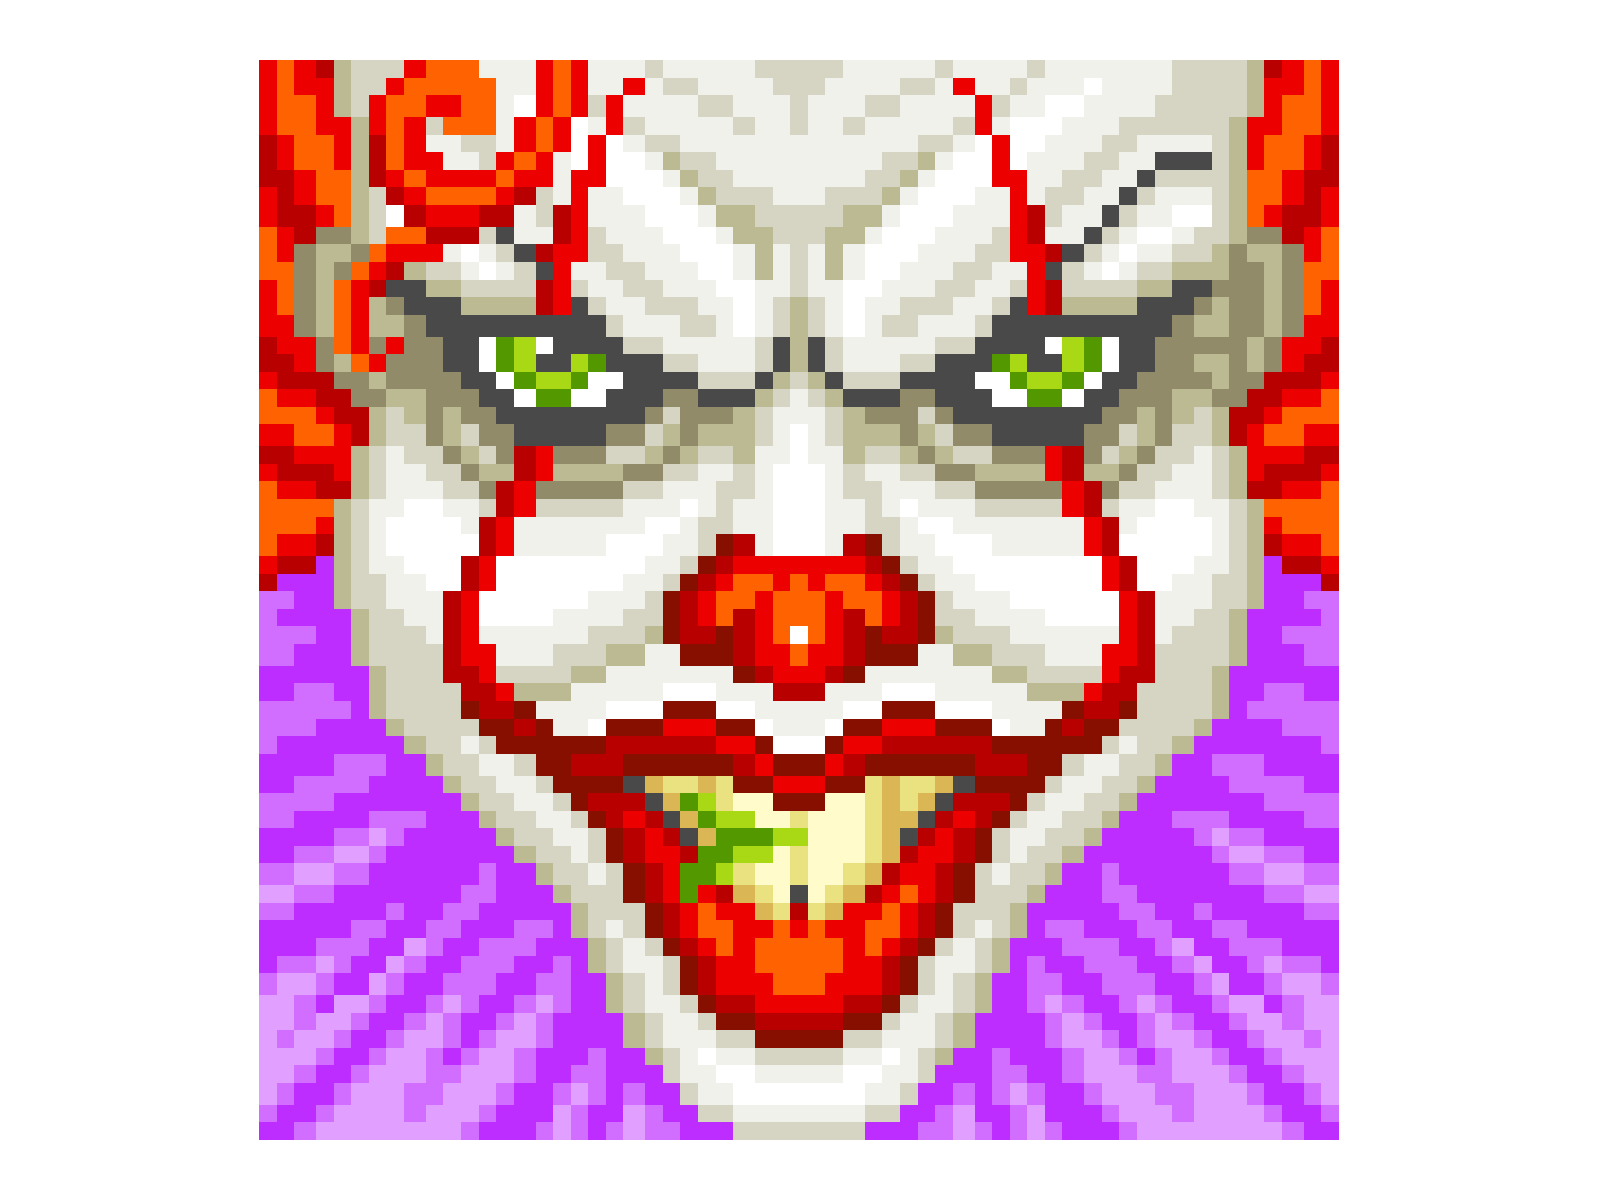 Halloween Party character design characters creepy design gif halloween halloween design horror characters horror films horrors illustration illustration art pixelart pixelartist pixels smile